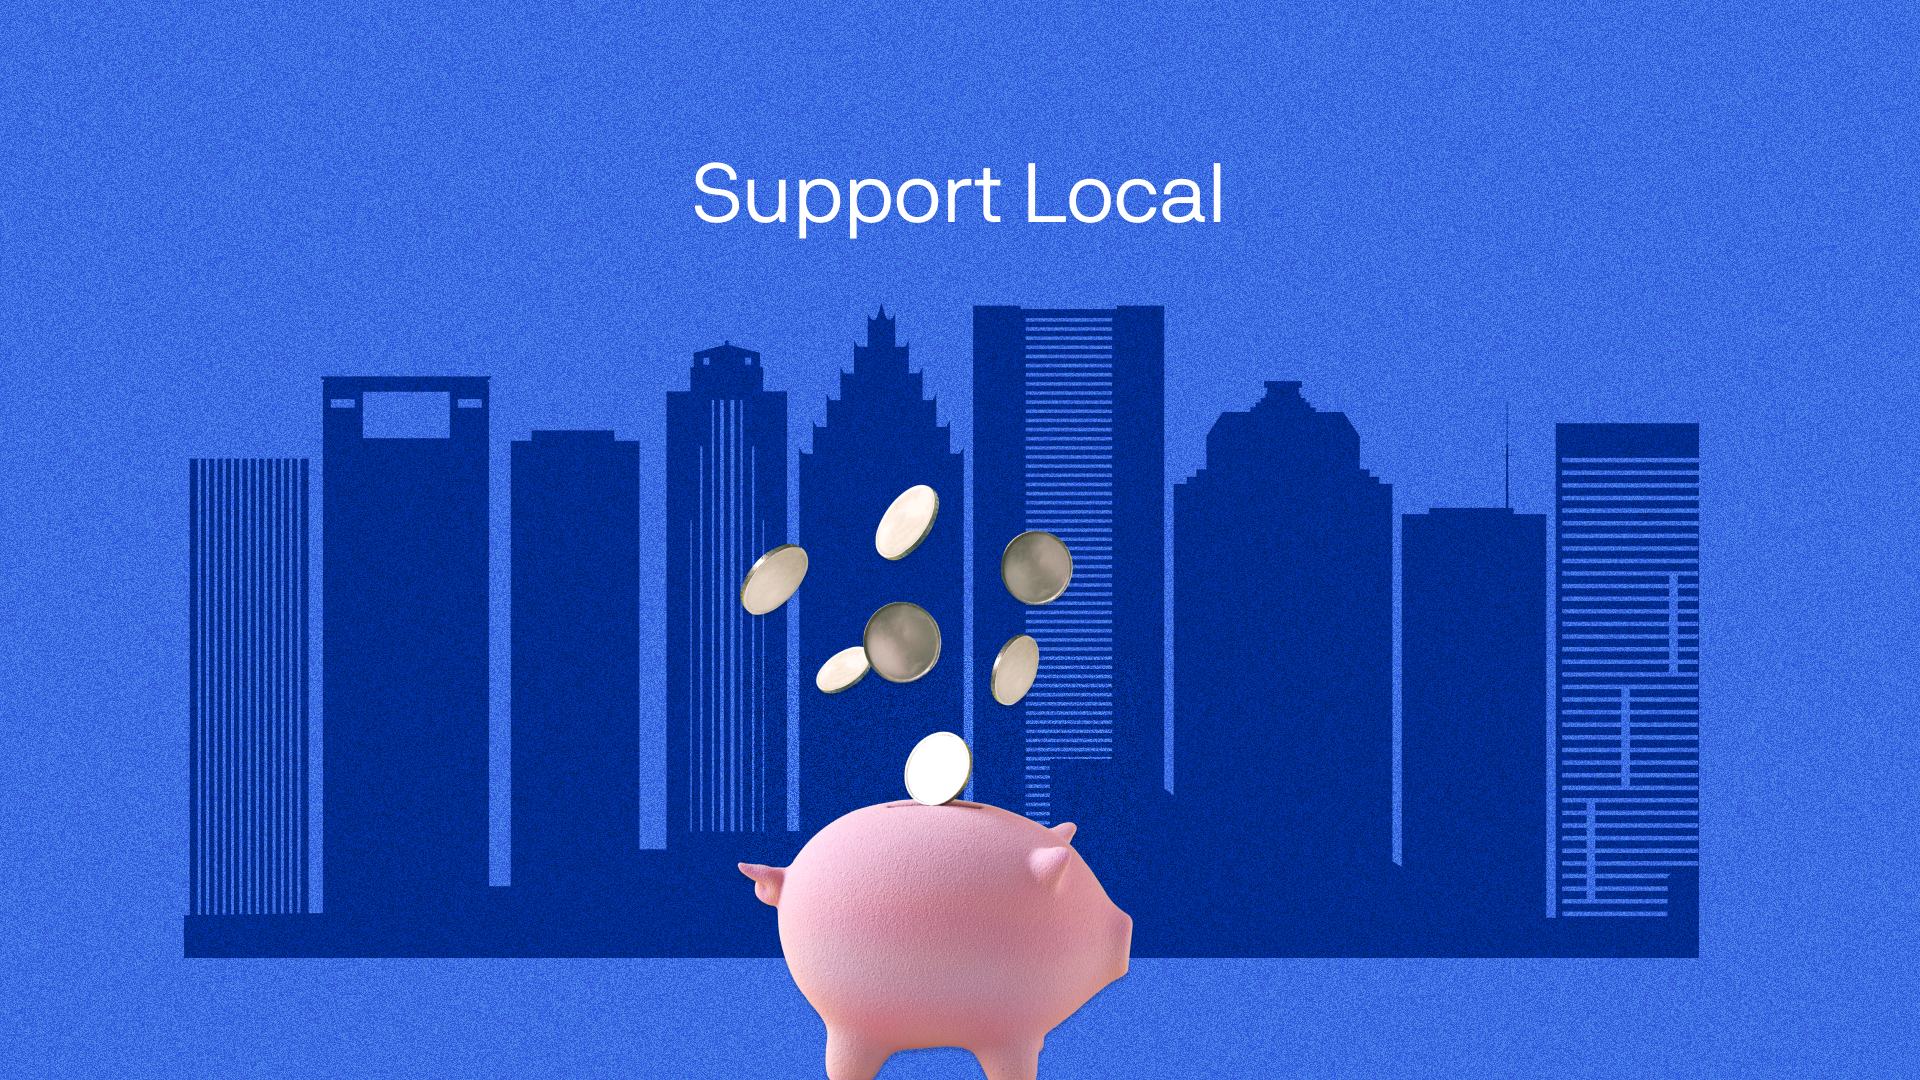 An illustration showing a piggybank with coins falling into it in front of a city skyline. The words Support Local are above it